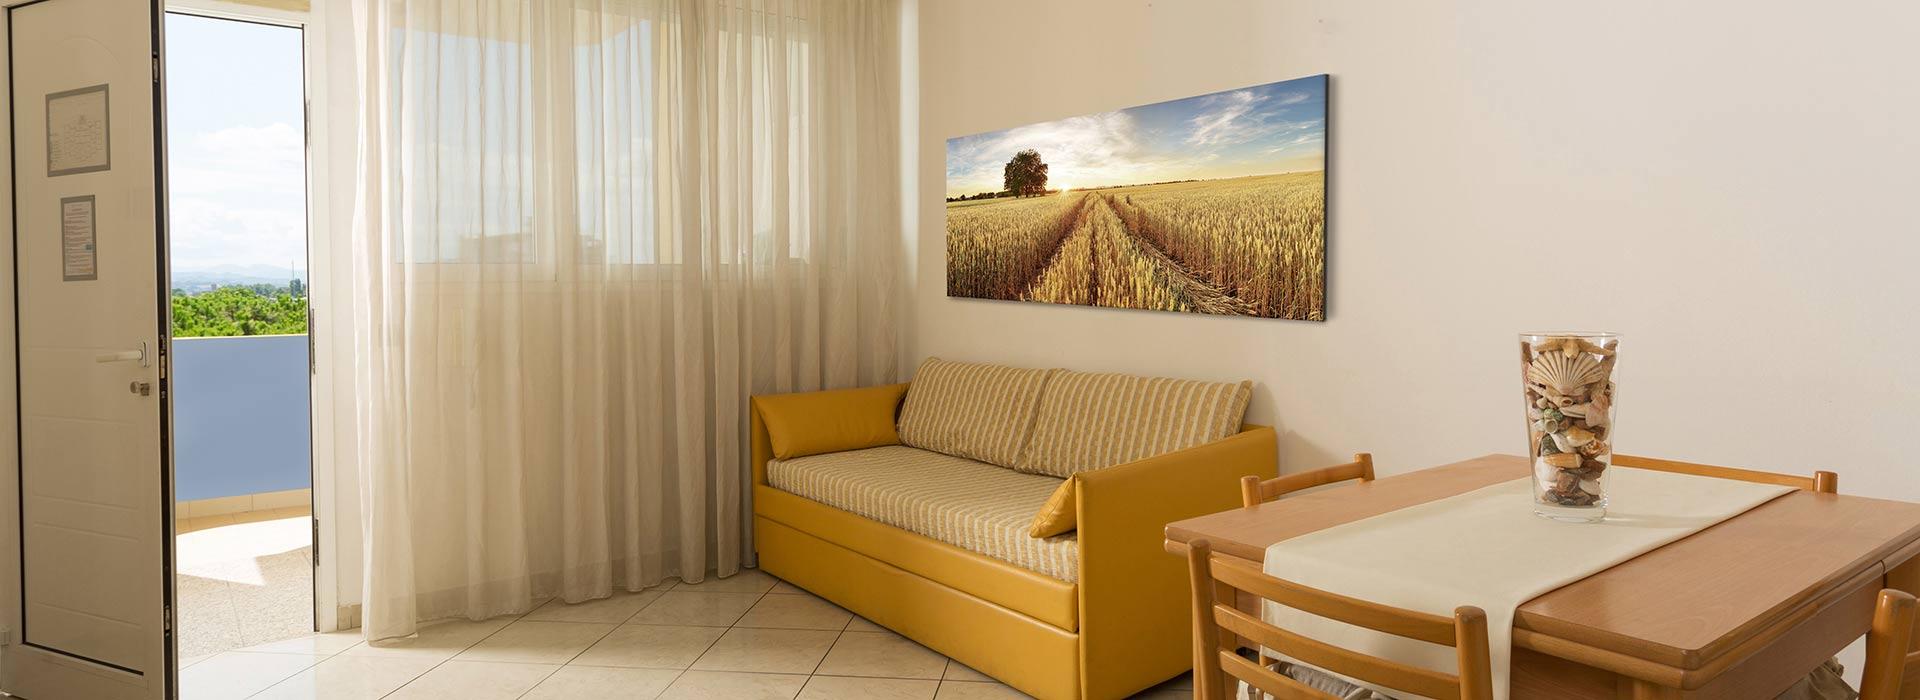 hotelpiccadilly it residence-rimini-fronte-mare 001